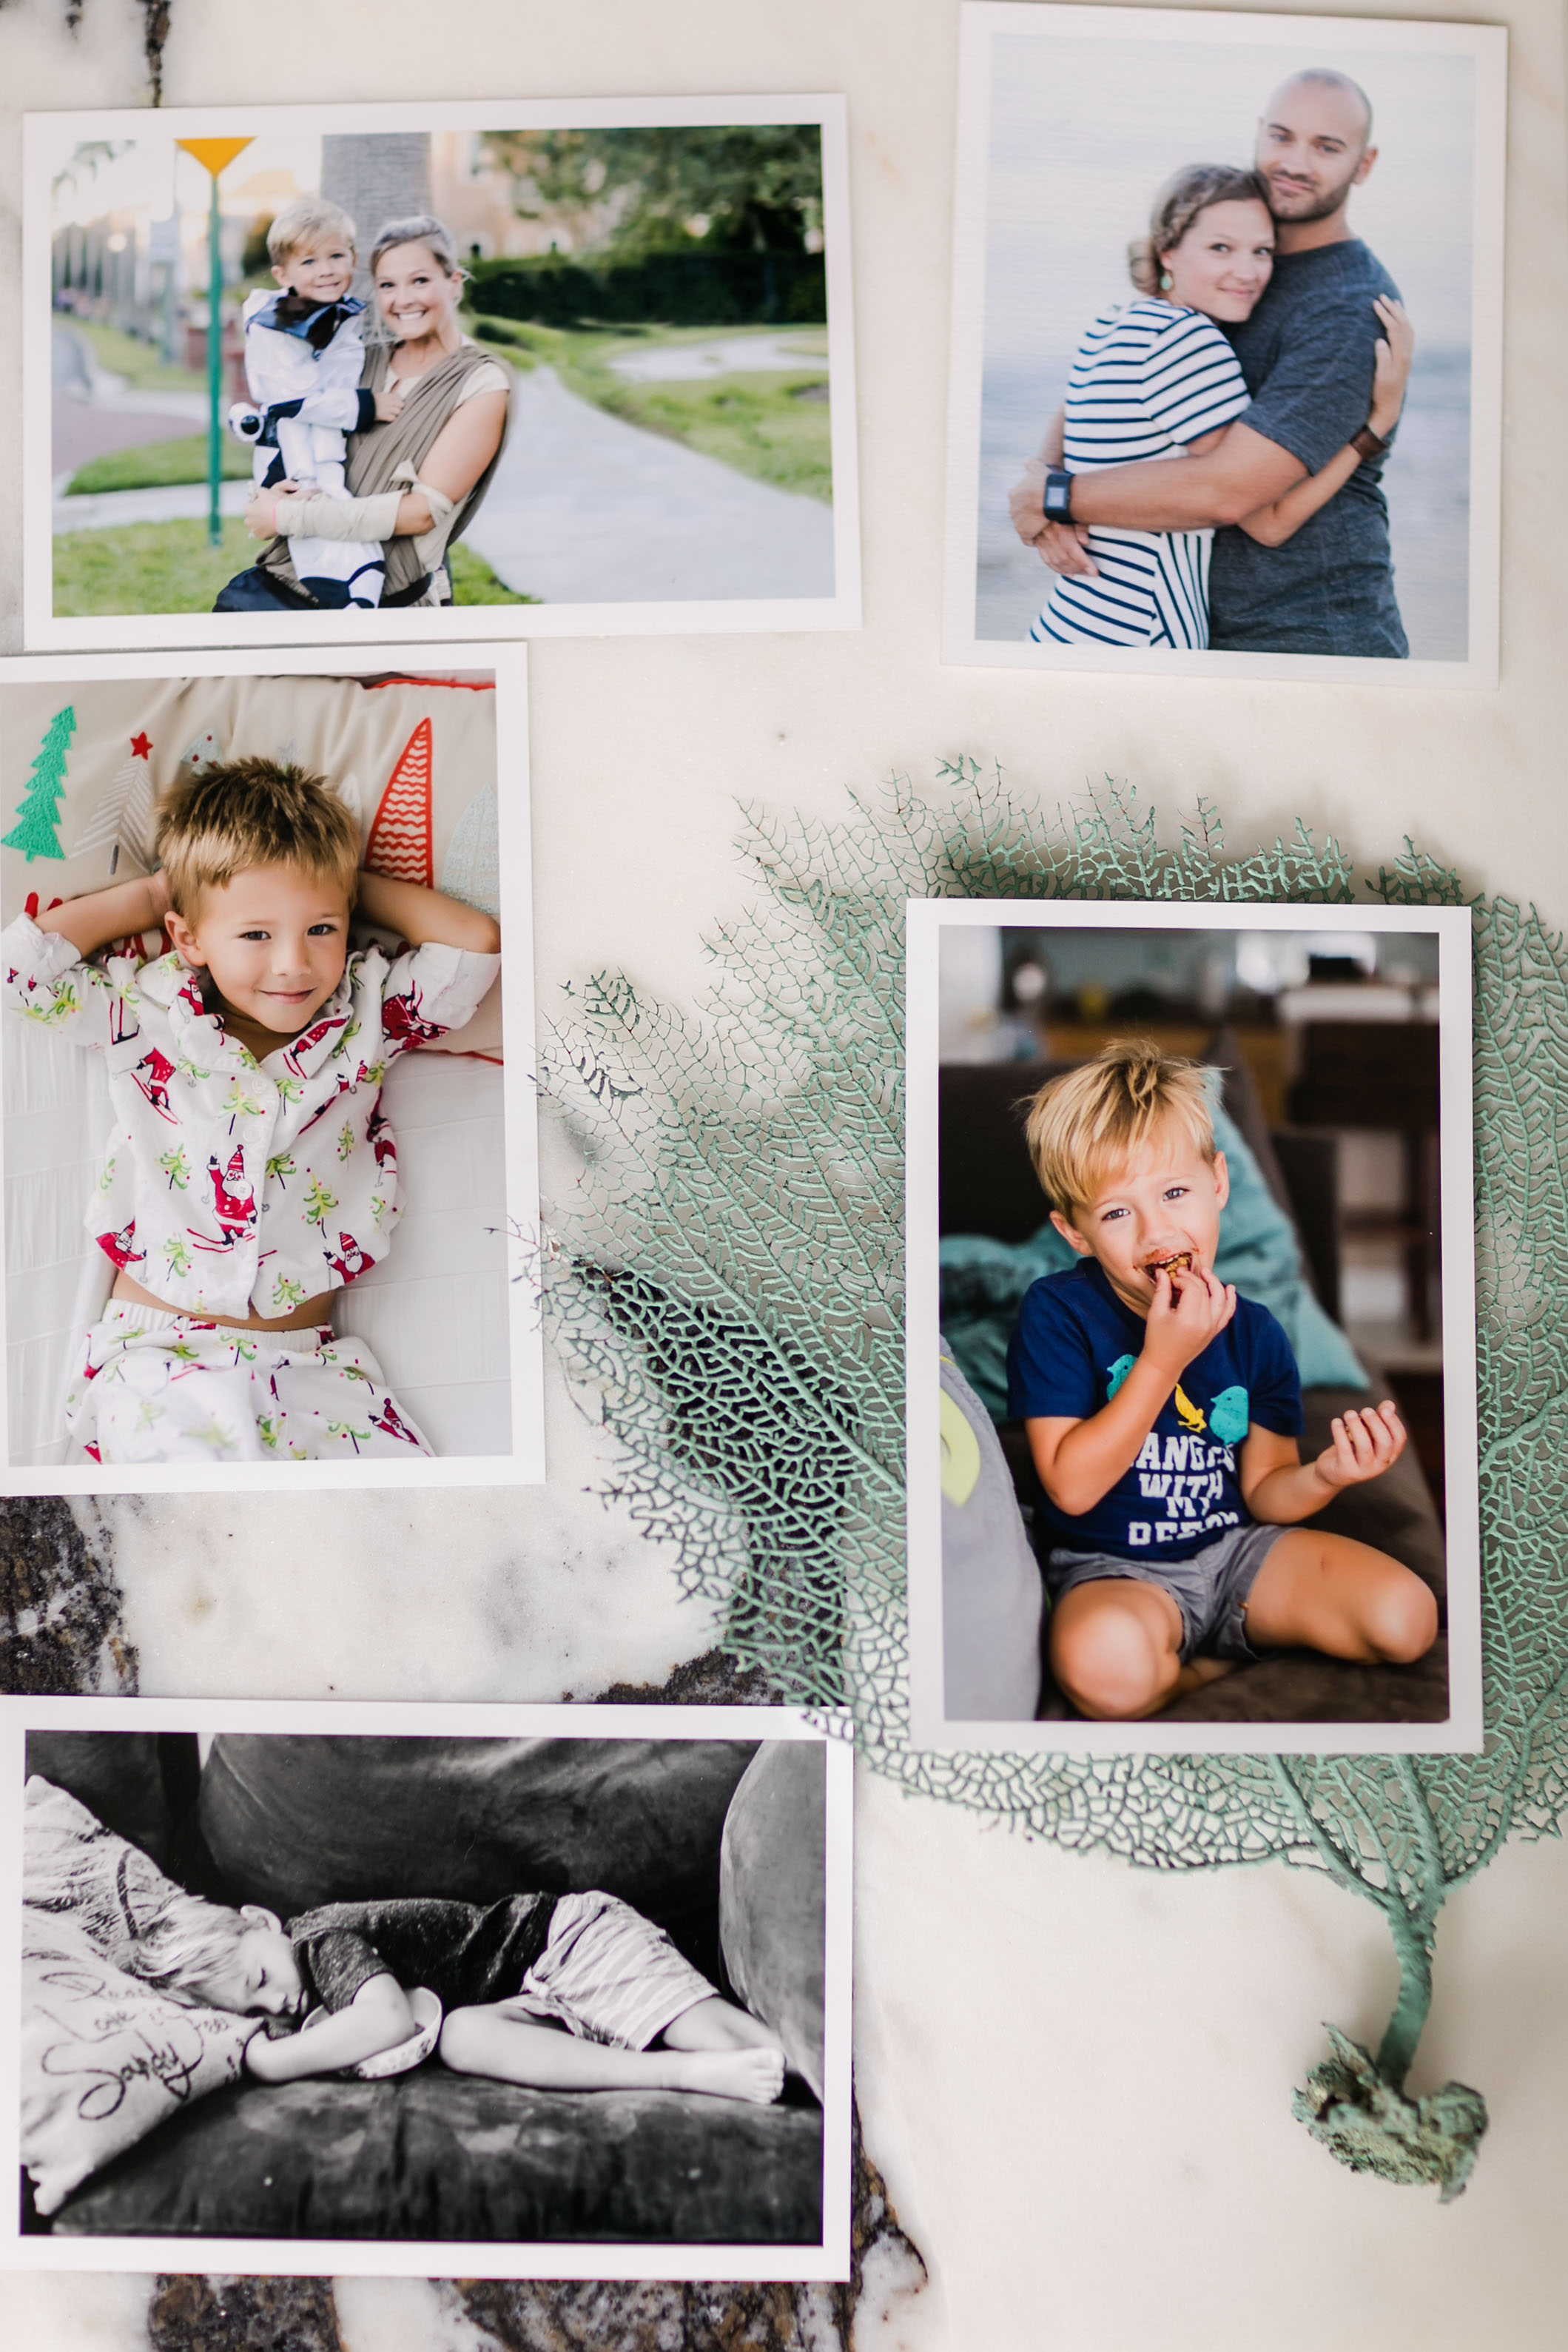 5 reasons to print your images